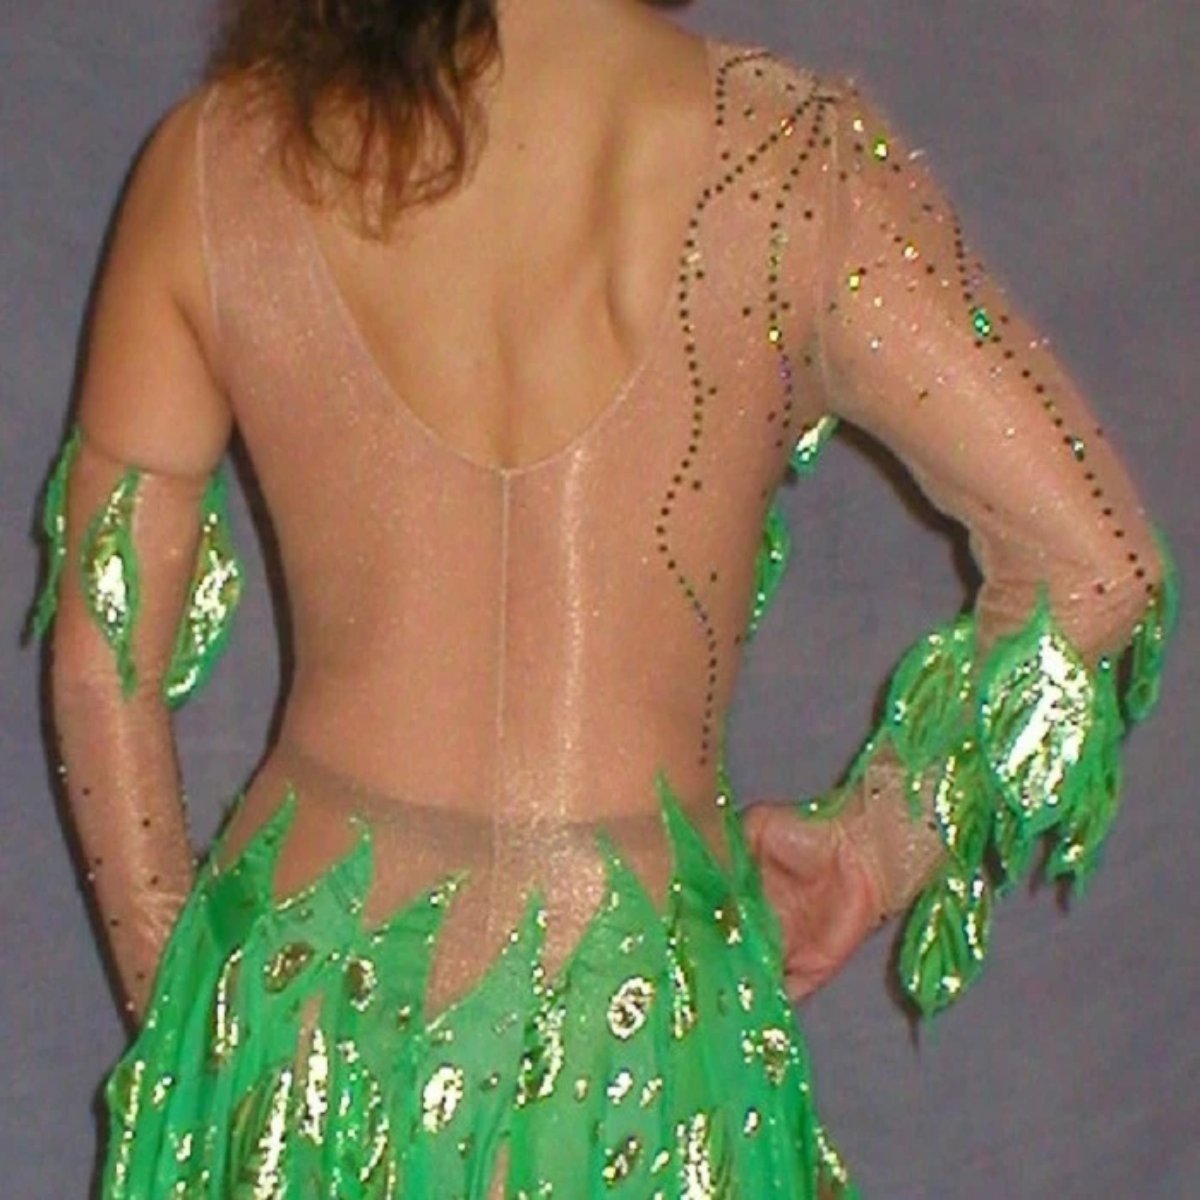 upper back view of Green Latin/rhythm dance dress was created on nude illusion base with green & gold metallic print chiffon… leaves hand cut & edged to embellish bodice, Swarovski rhinestones are trickled throughout in Vitrail medium(shines different shades of green & gold) 